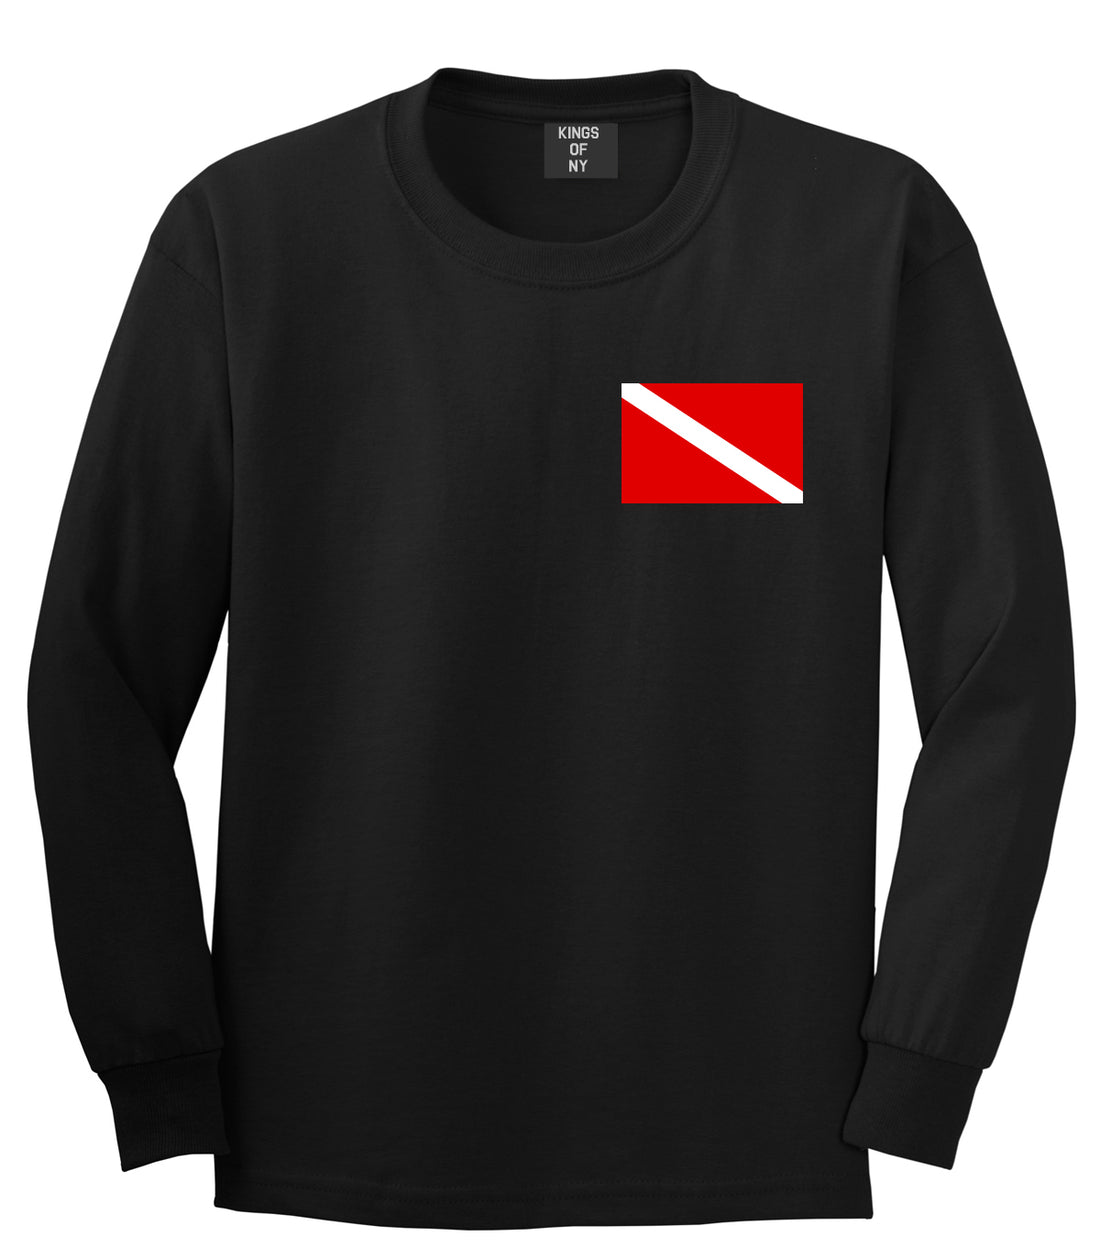 Scuba Dive Flag Chest Mens Black Long Sleeve T-Shirt by Kings Of NY